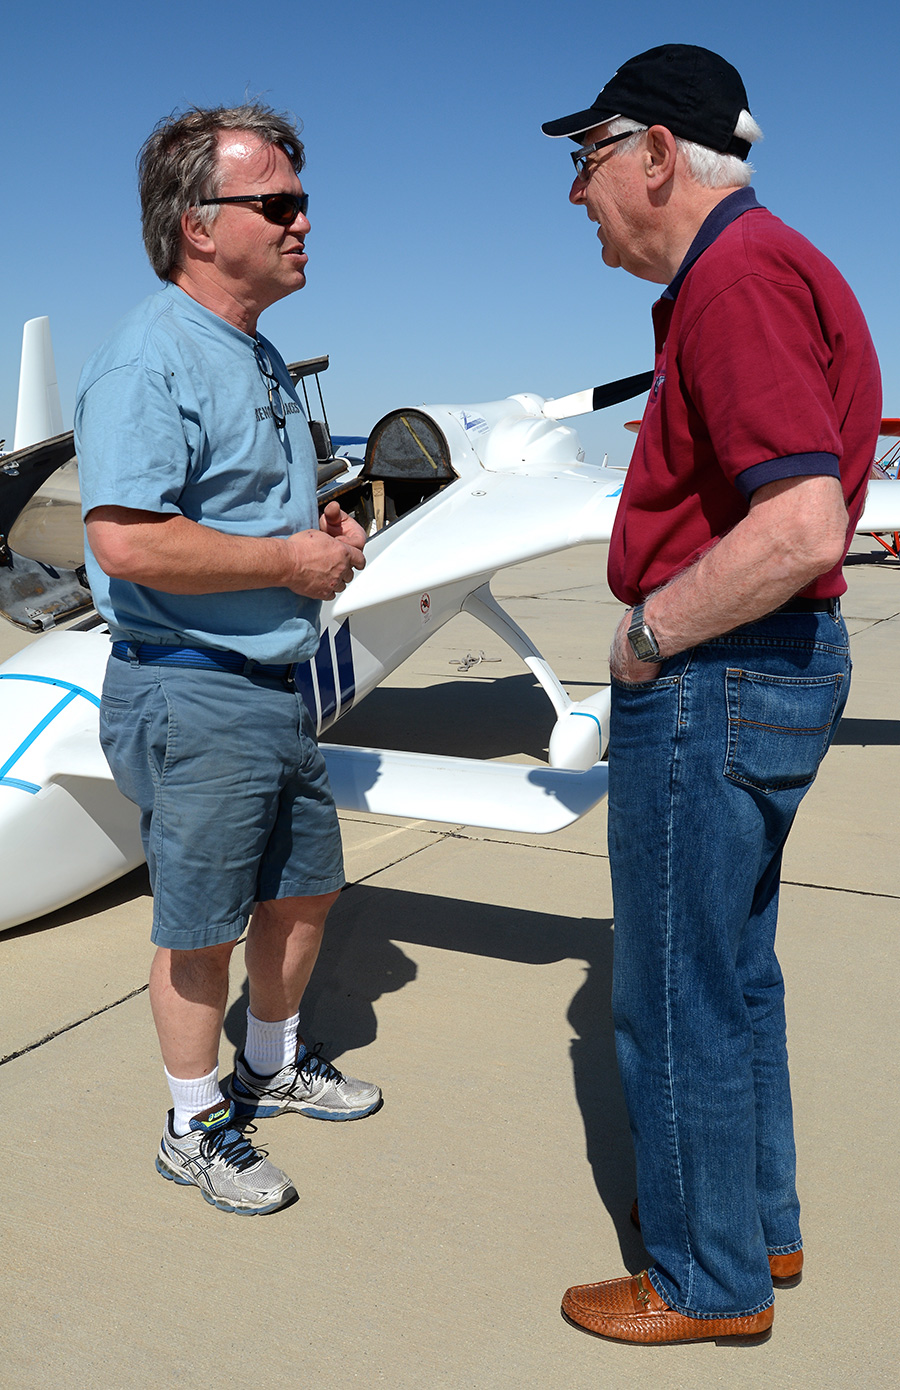 What It’s All About While the hardware is a draw, what the MEFI is all about is meeting like-minded experimenters. Just one example is Klaus Savier (left), owner of Lightspeed Engineering and 2-time record setter at Mojave this year, chats with Brian Utley, the official NAA observer during speed week. The density of experimental aviation brain-power at Mojave is unexcelled.